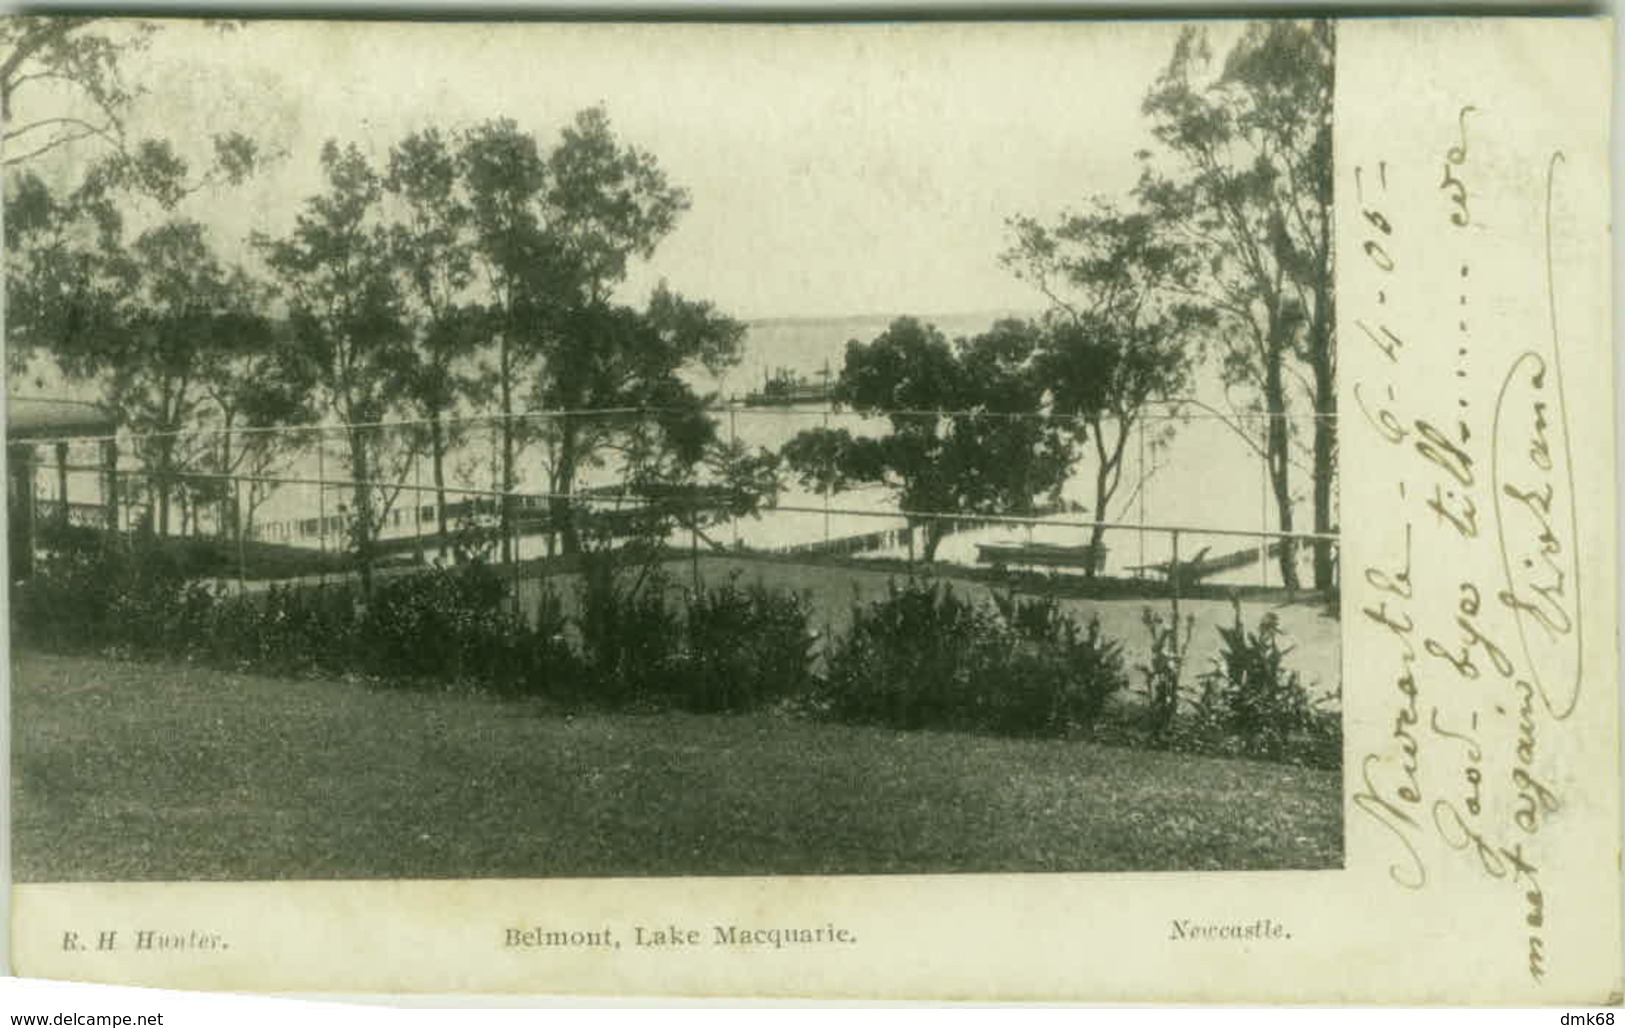 AUSTRALIA - NEWCASTLE - BELMONT LAKE MACQUAIRE - EDIT R.H. HUNTER - STAMPS - MAILED TO ITALY - 1900s  (7268) - Newcastle